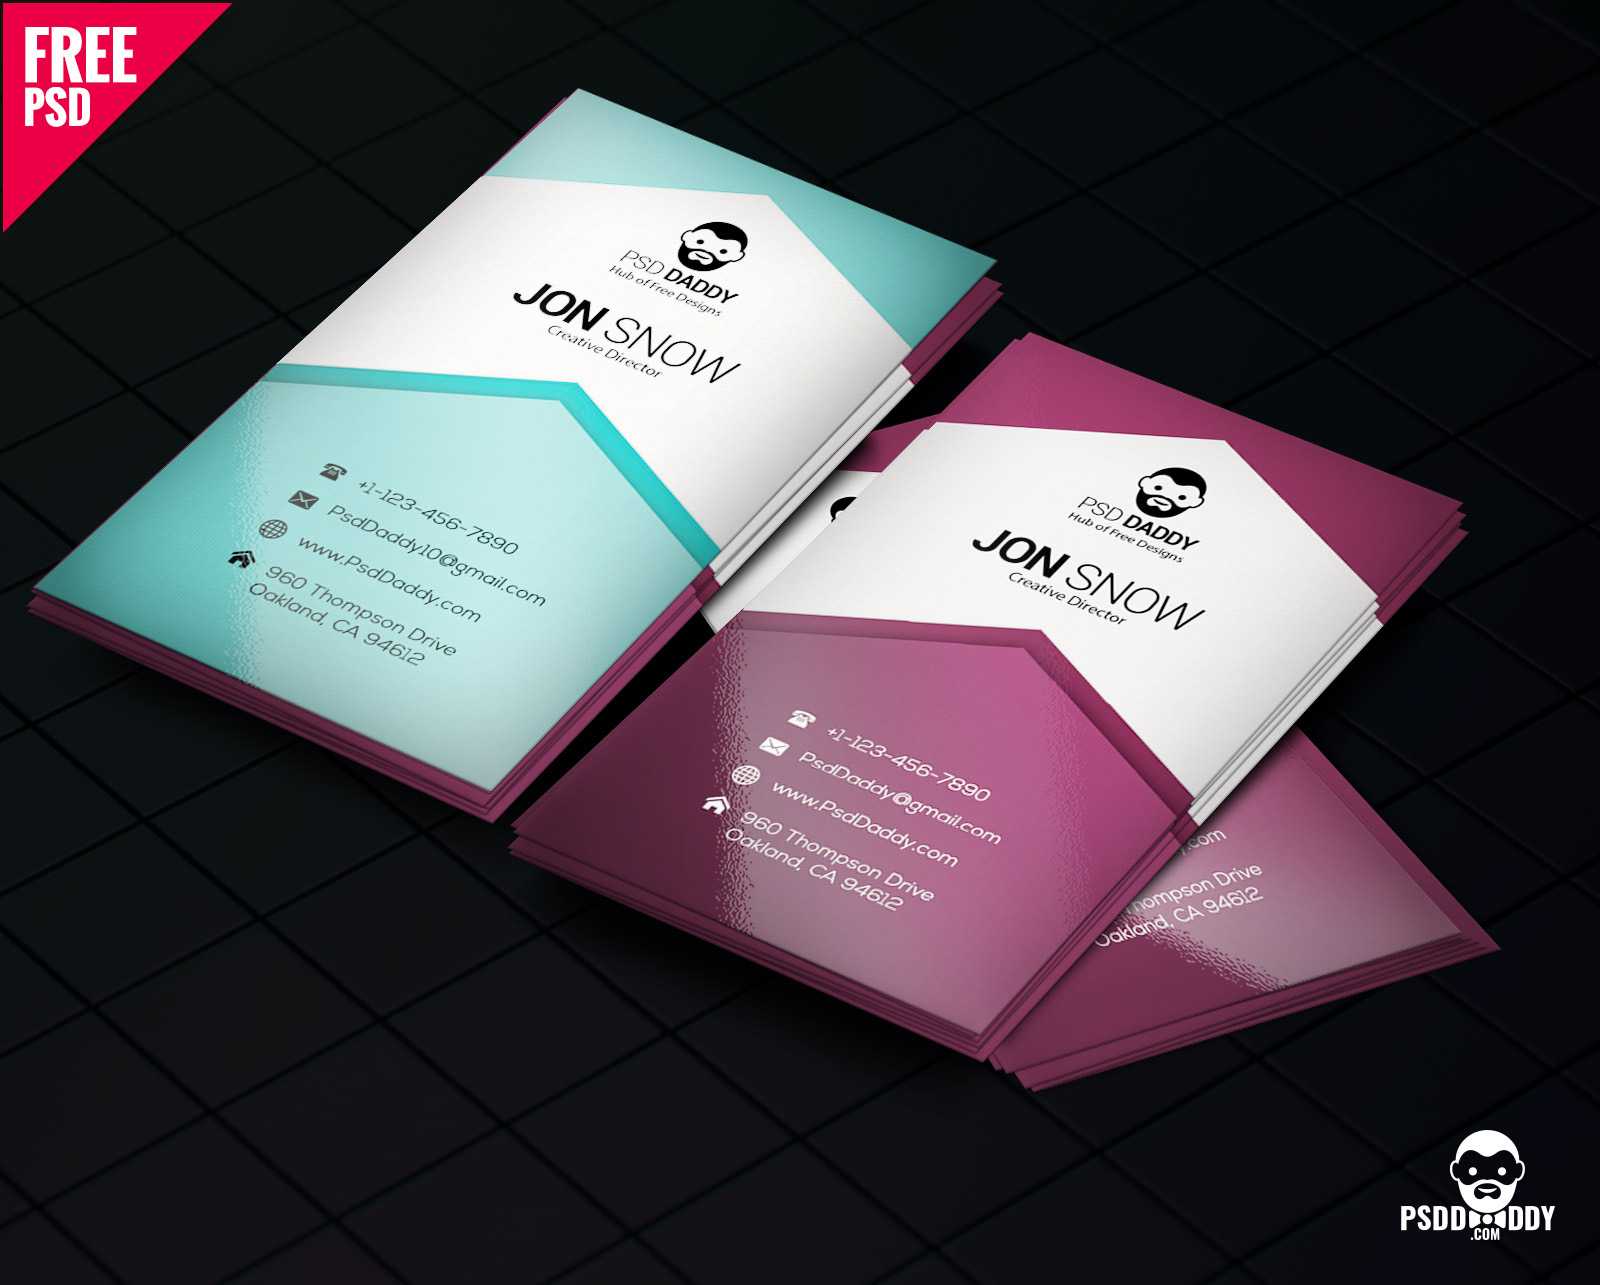 Download]Creative Business Card Psd Free | Psddaddy Intended For Free Psd Visiting Card Templates Download